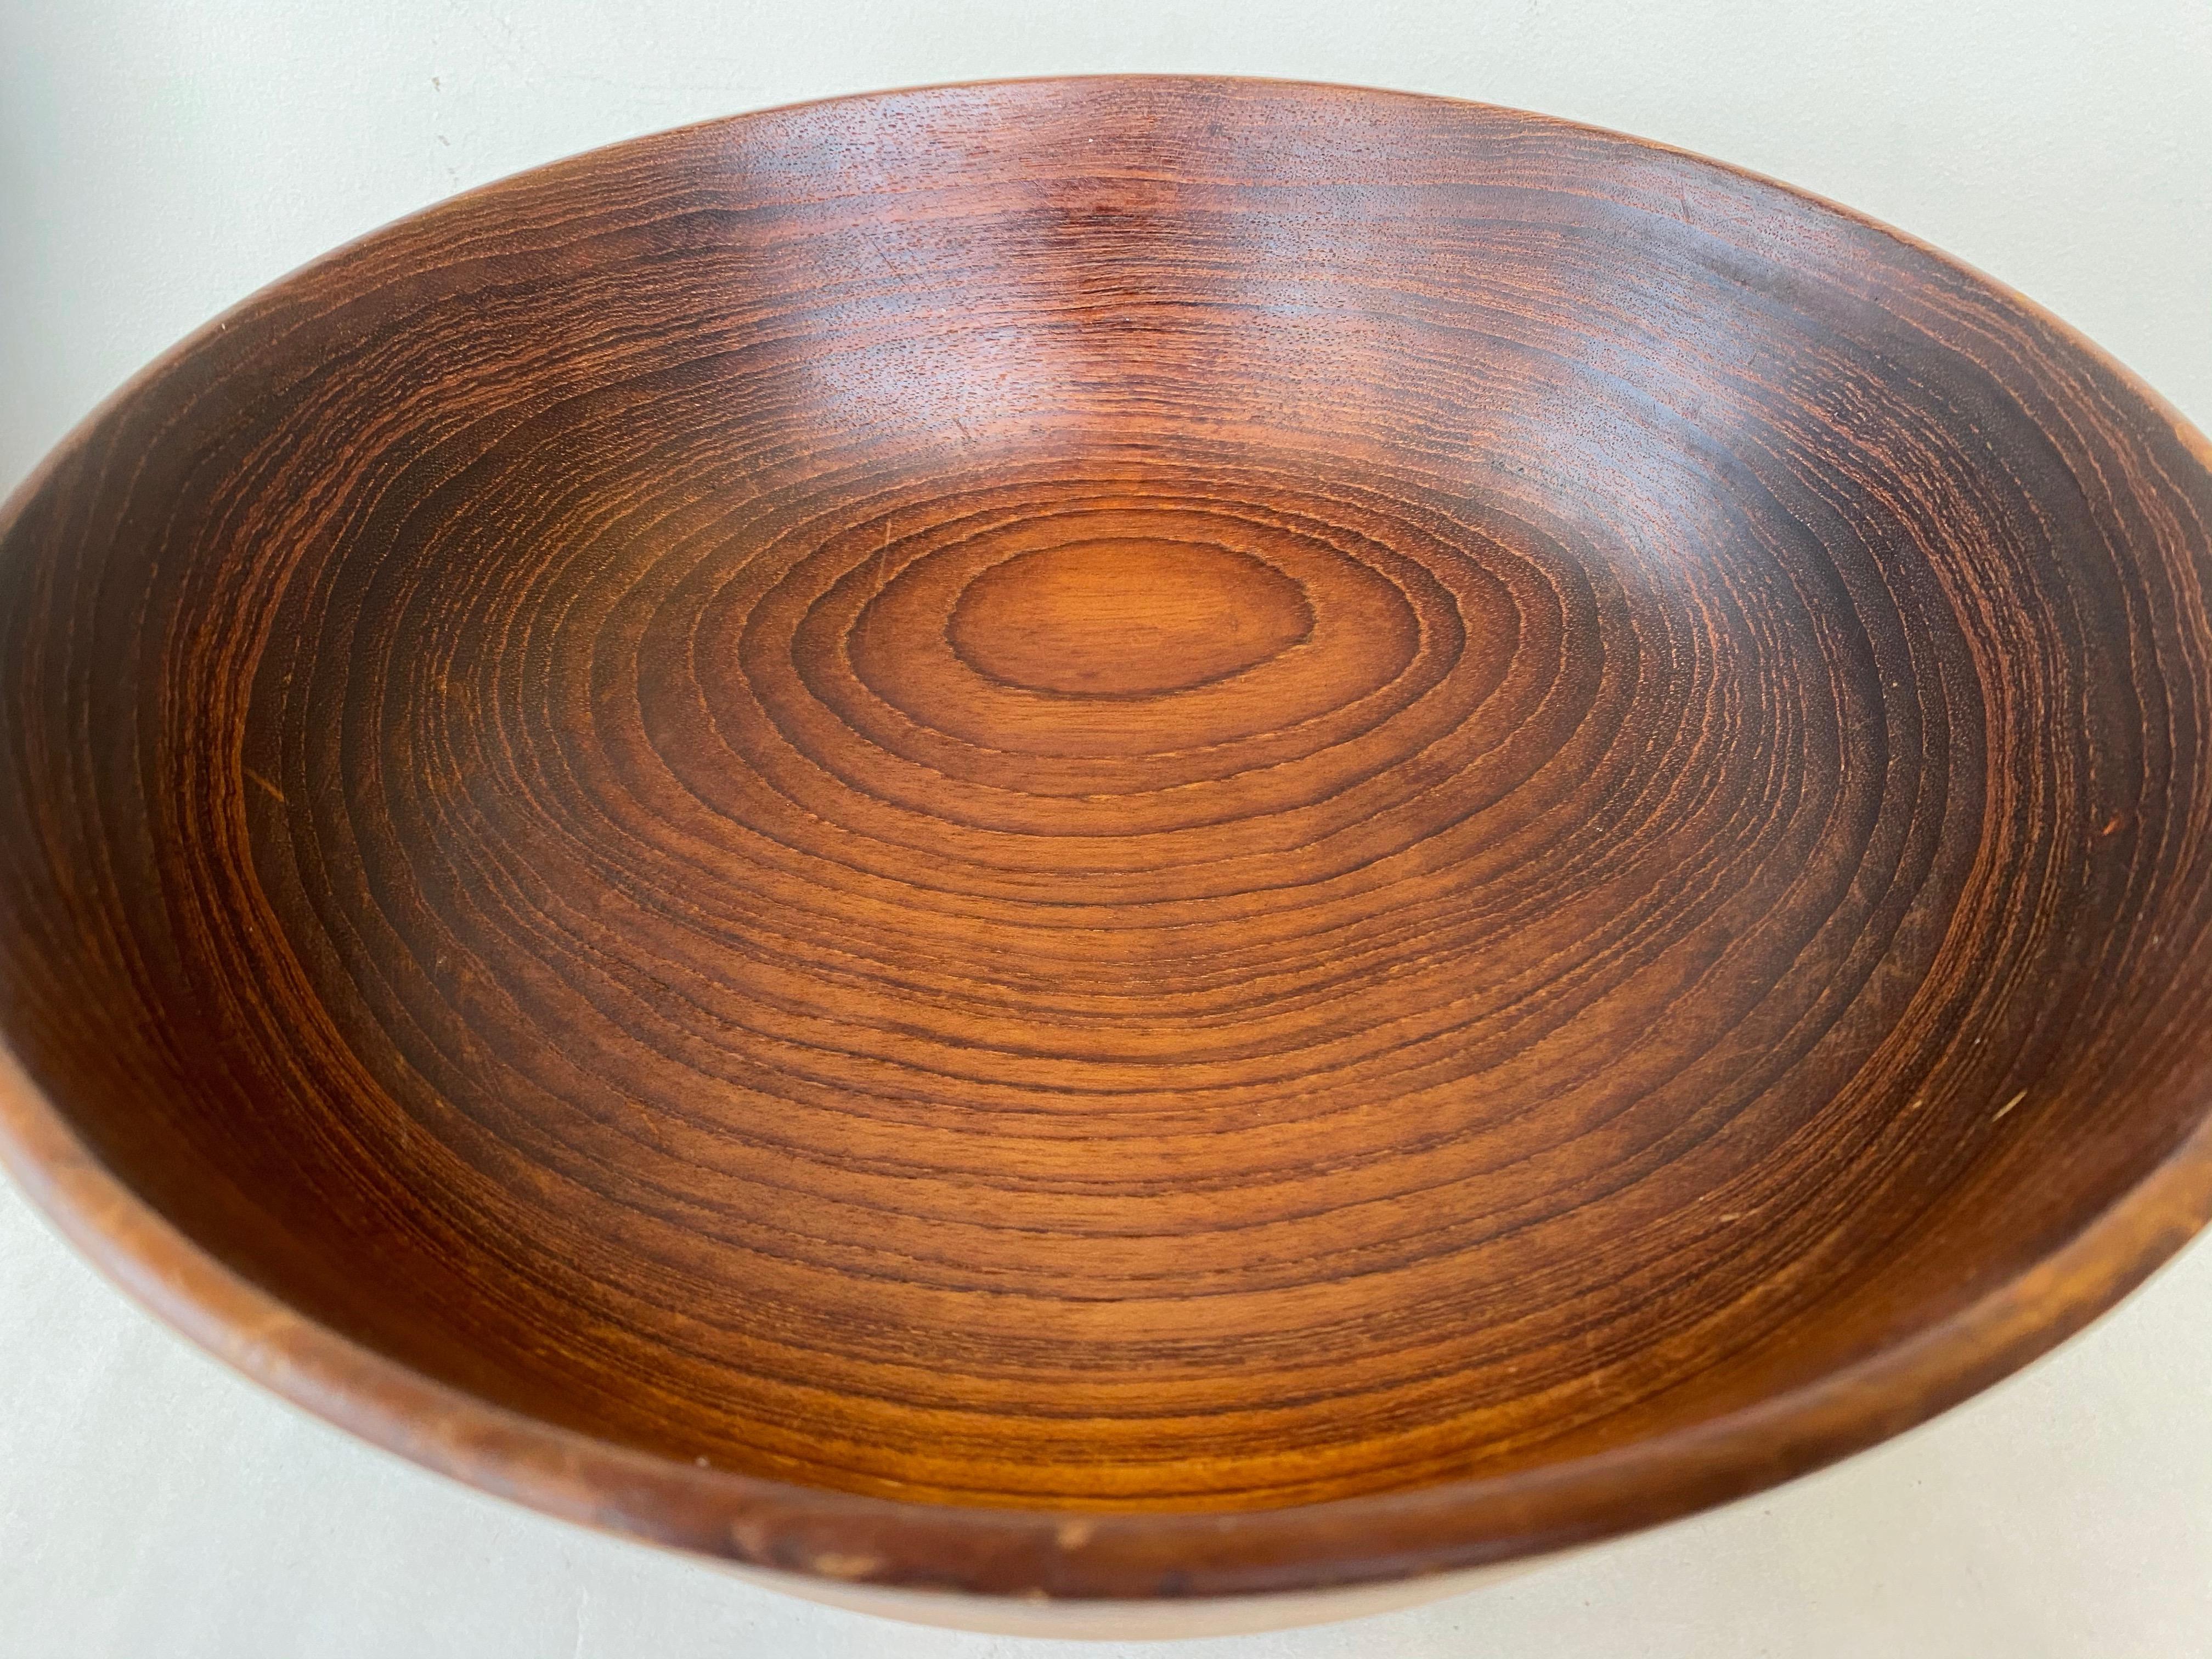 Bob Stocksdale Teak Turned Wood Bowl with Exceptional Grain Pattern, Early 1970s For Sale 8